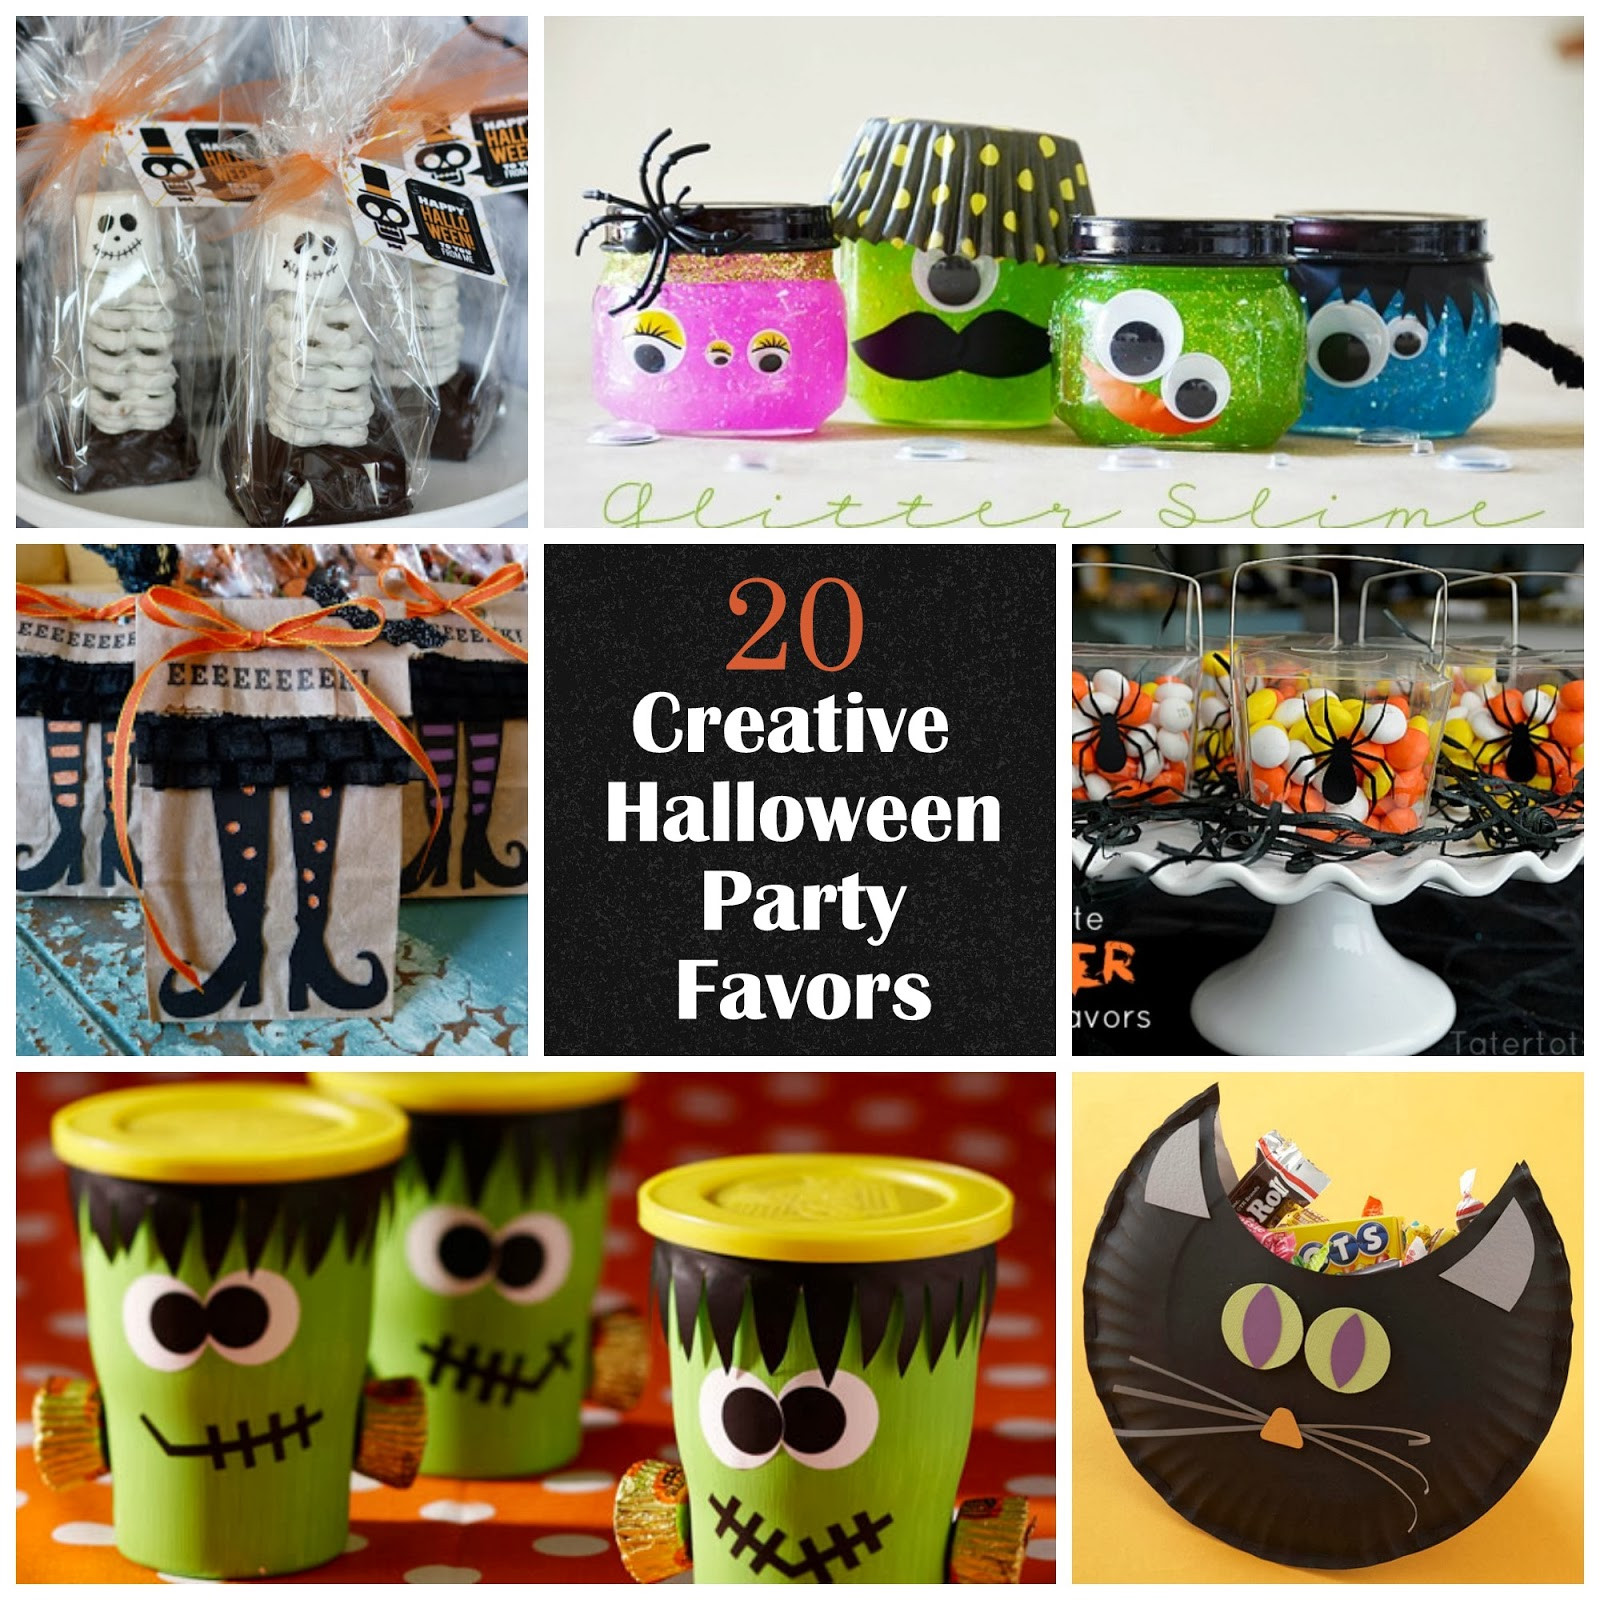 Pinterest Halloween Party Ideas
 27 Halloween Decor Craft Recipe and Party Ideas on I Dig